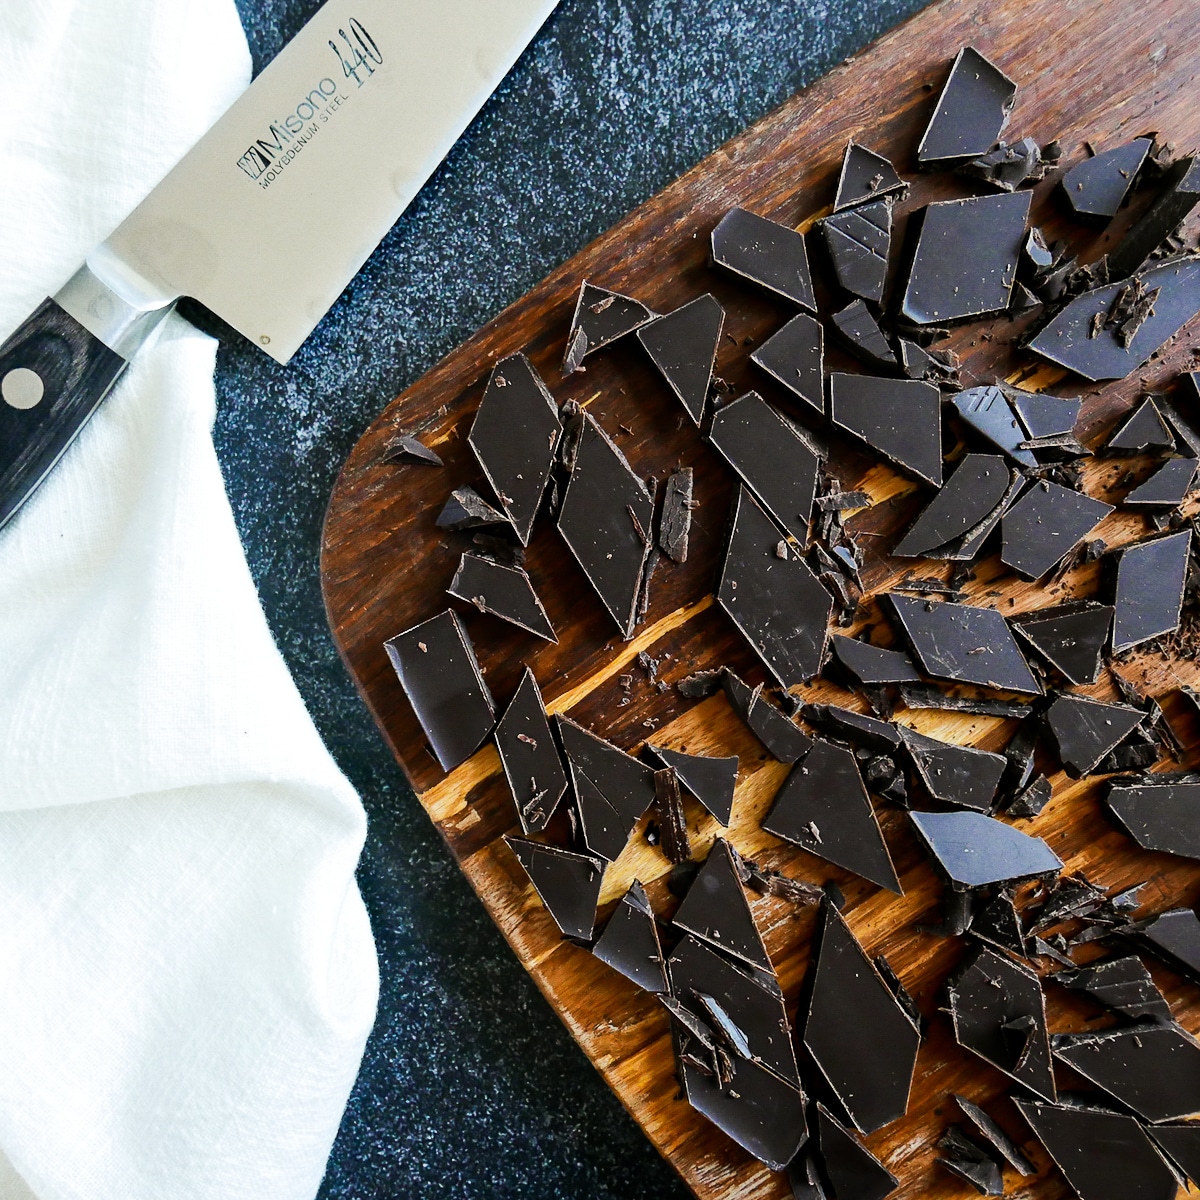 dark chocolate cut into pieces on a wooden cutting board with knife.